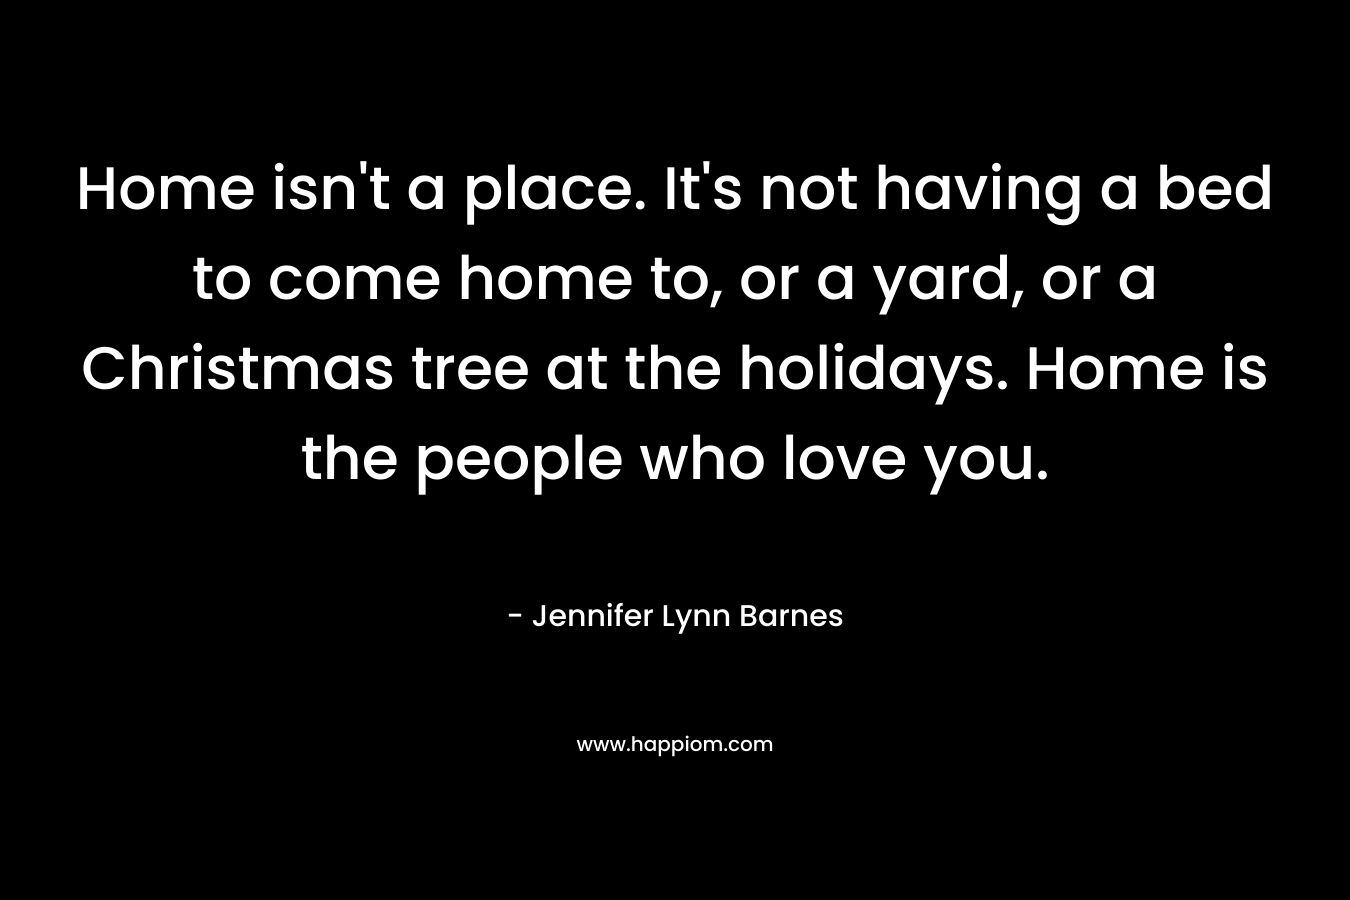 Home isn't a place. It's not having a bed to come home to, or a yard, or a Christmas tree at the holidays. Home is the people who love you.